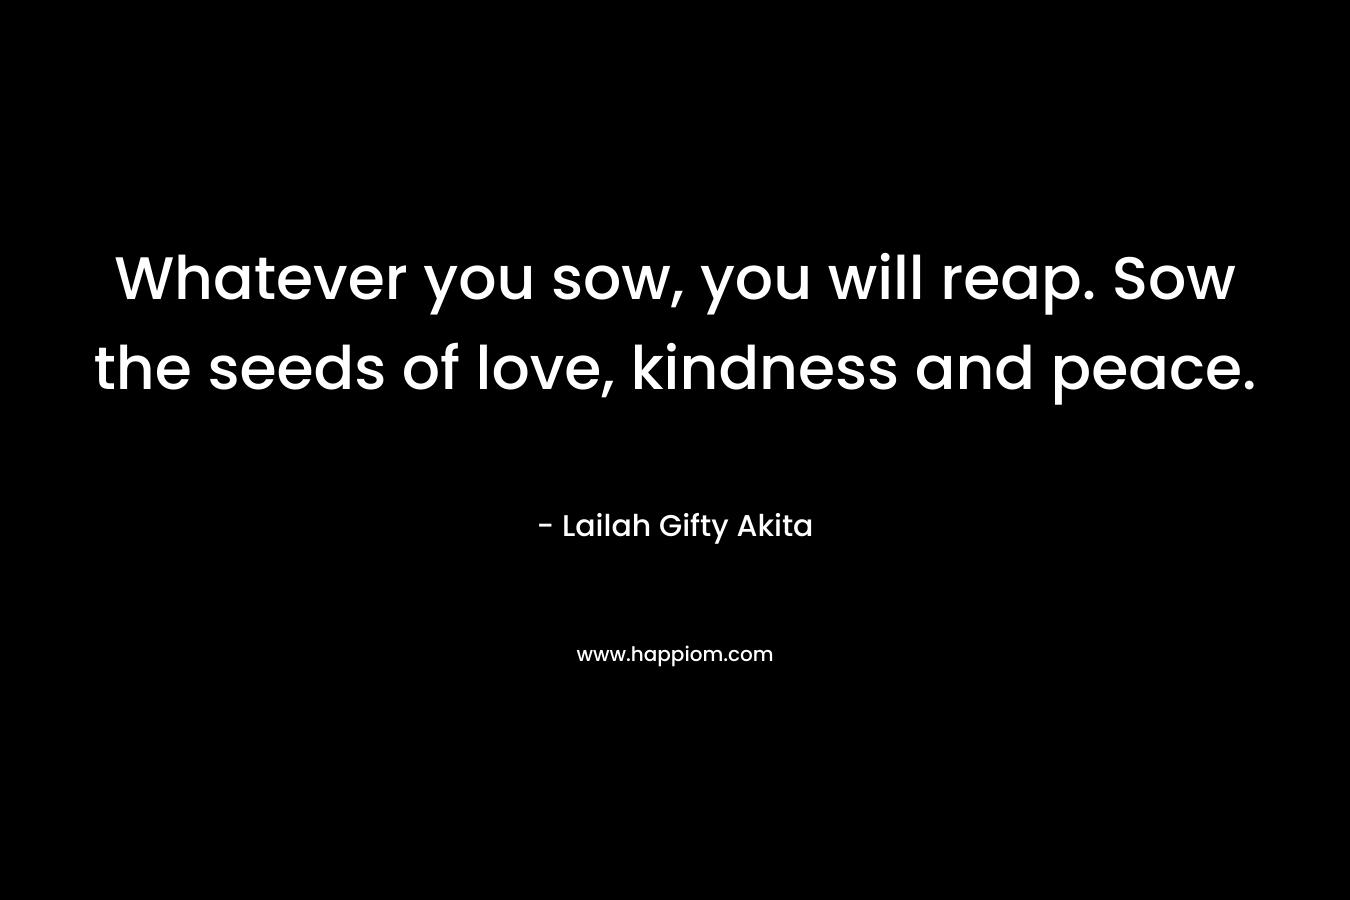 Whatever you sow, you will reap. Sow the seeds of love, kindness and peace.